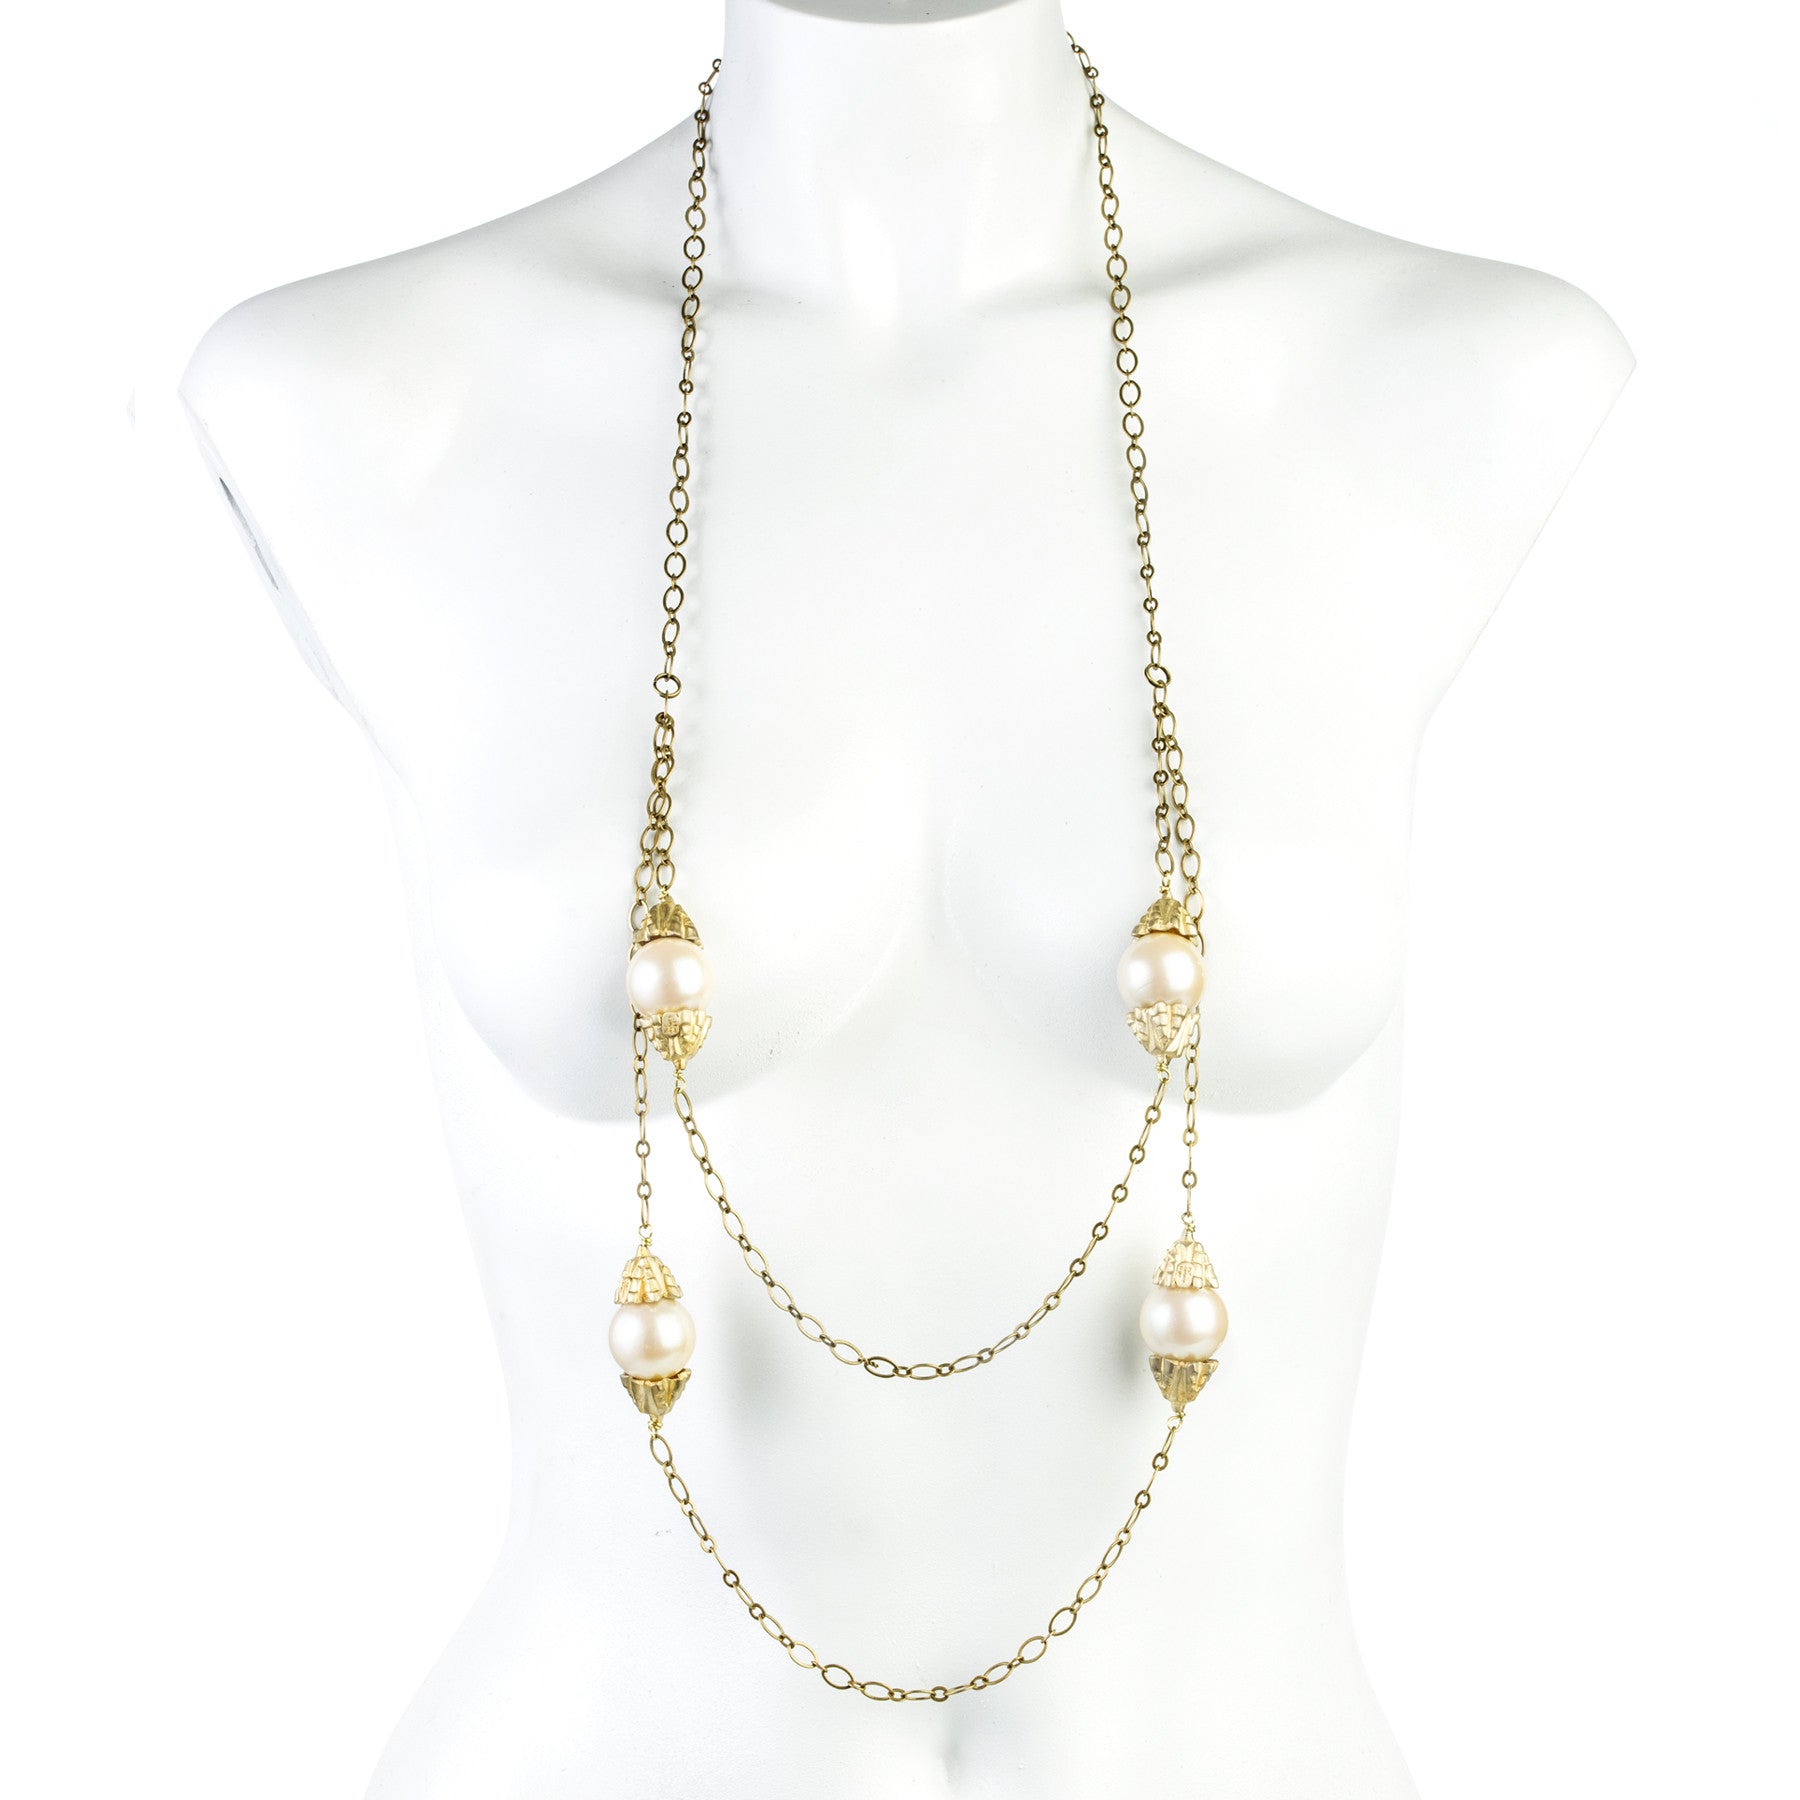 DECO PEARLS AND CHAINS